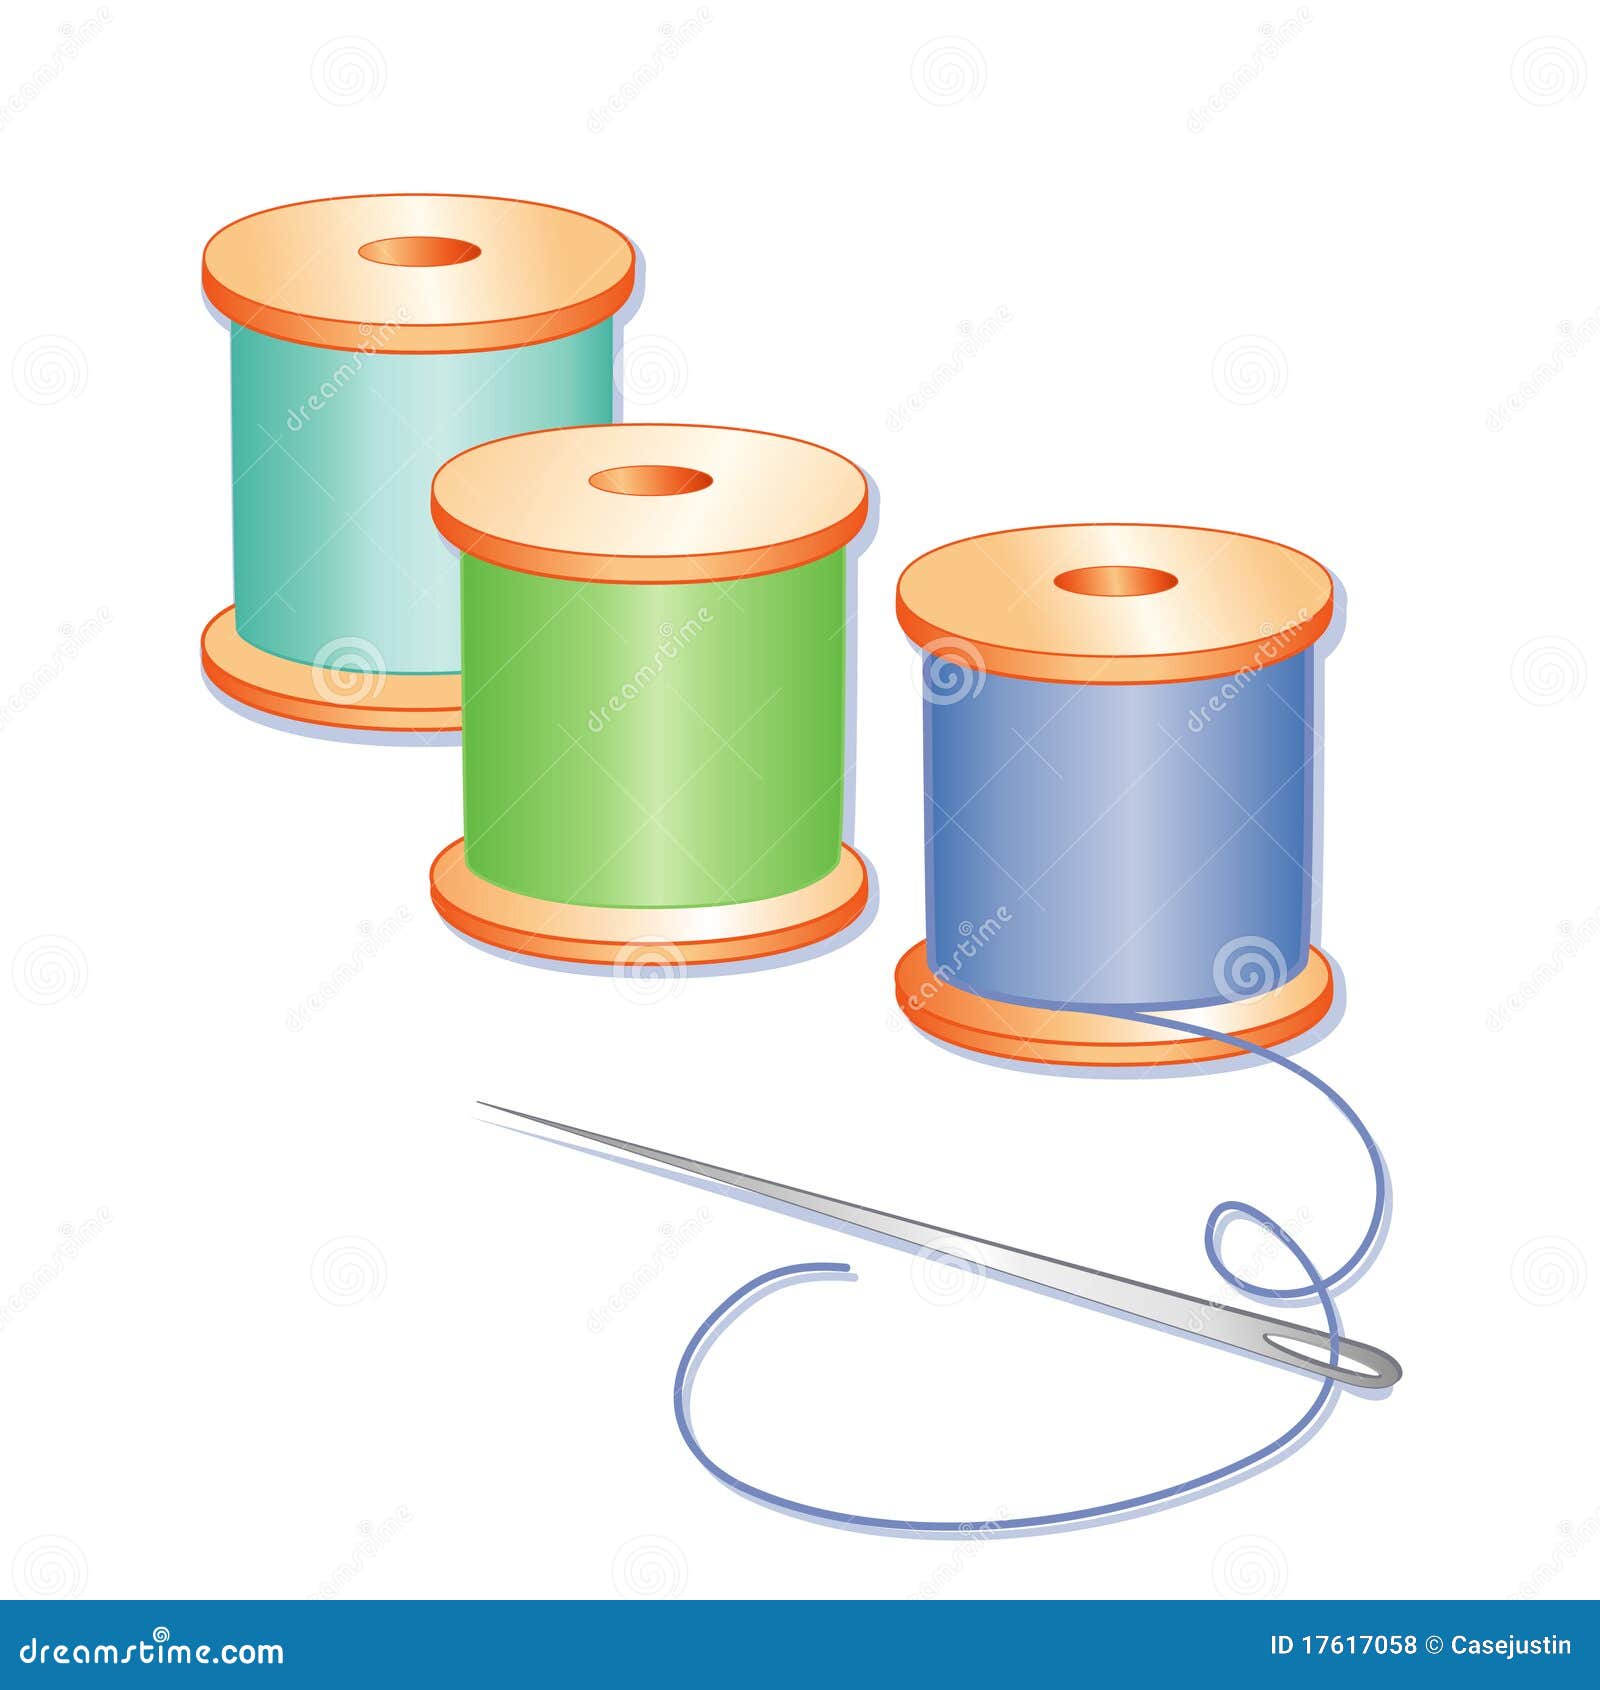 Needle and Threads stock vector. Illustration of pastel - 17617058